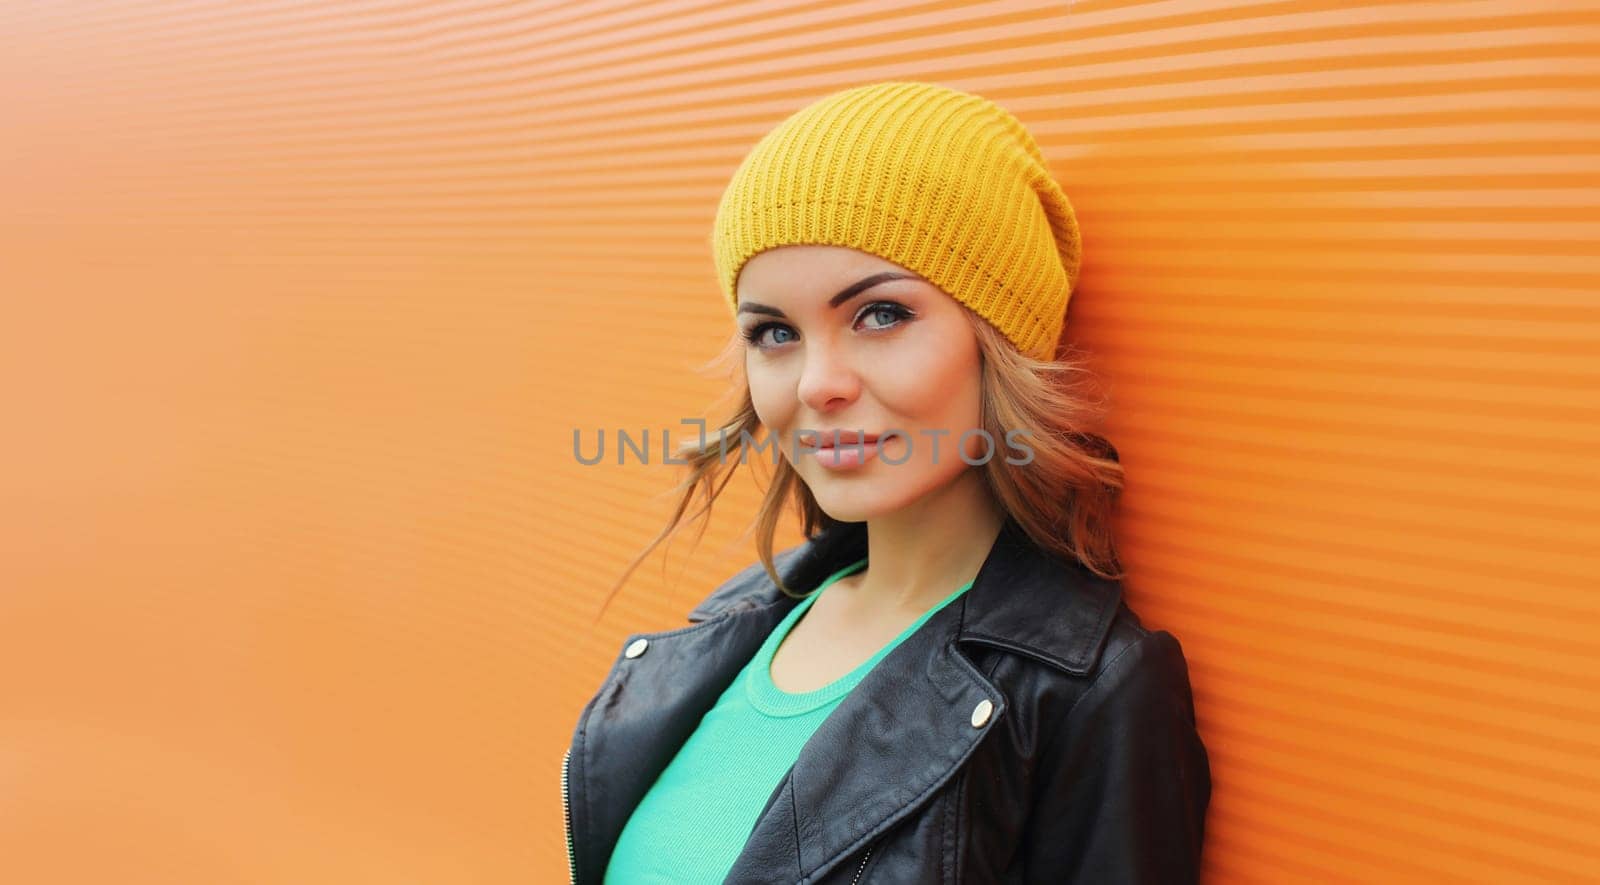 Portrait of beautiful young blonde woman posing in yellow hat, black leather jacket looking at camera on colorful orange background